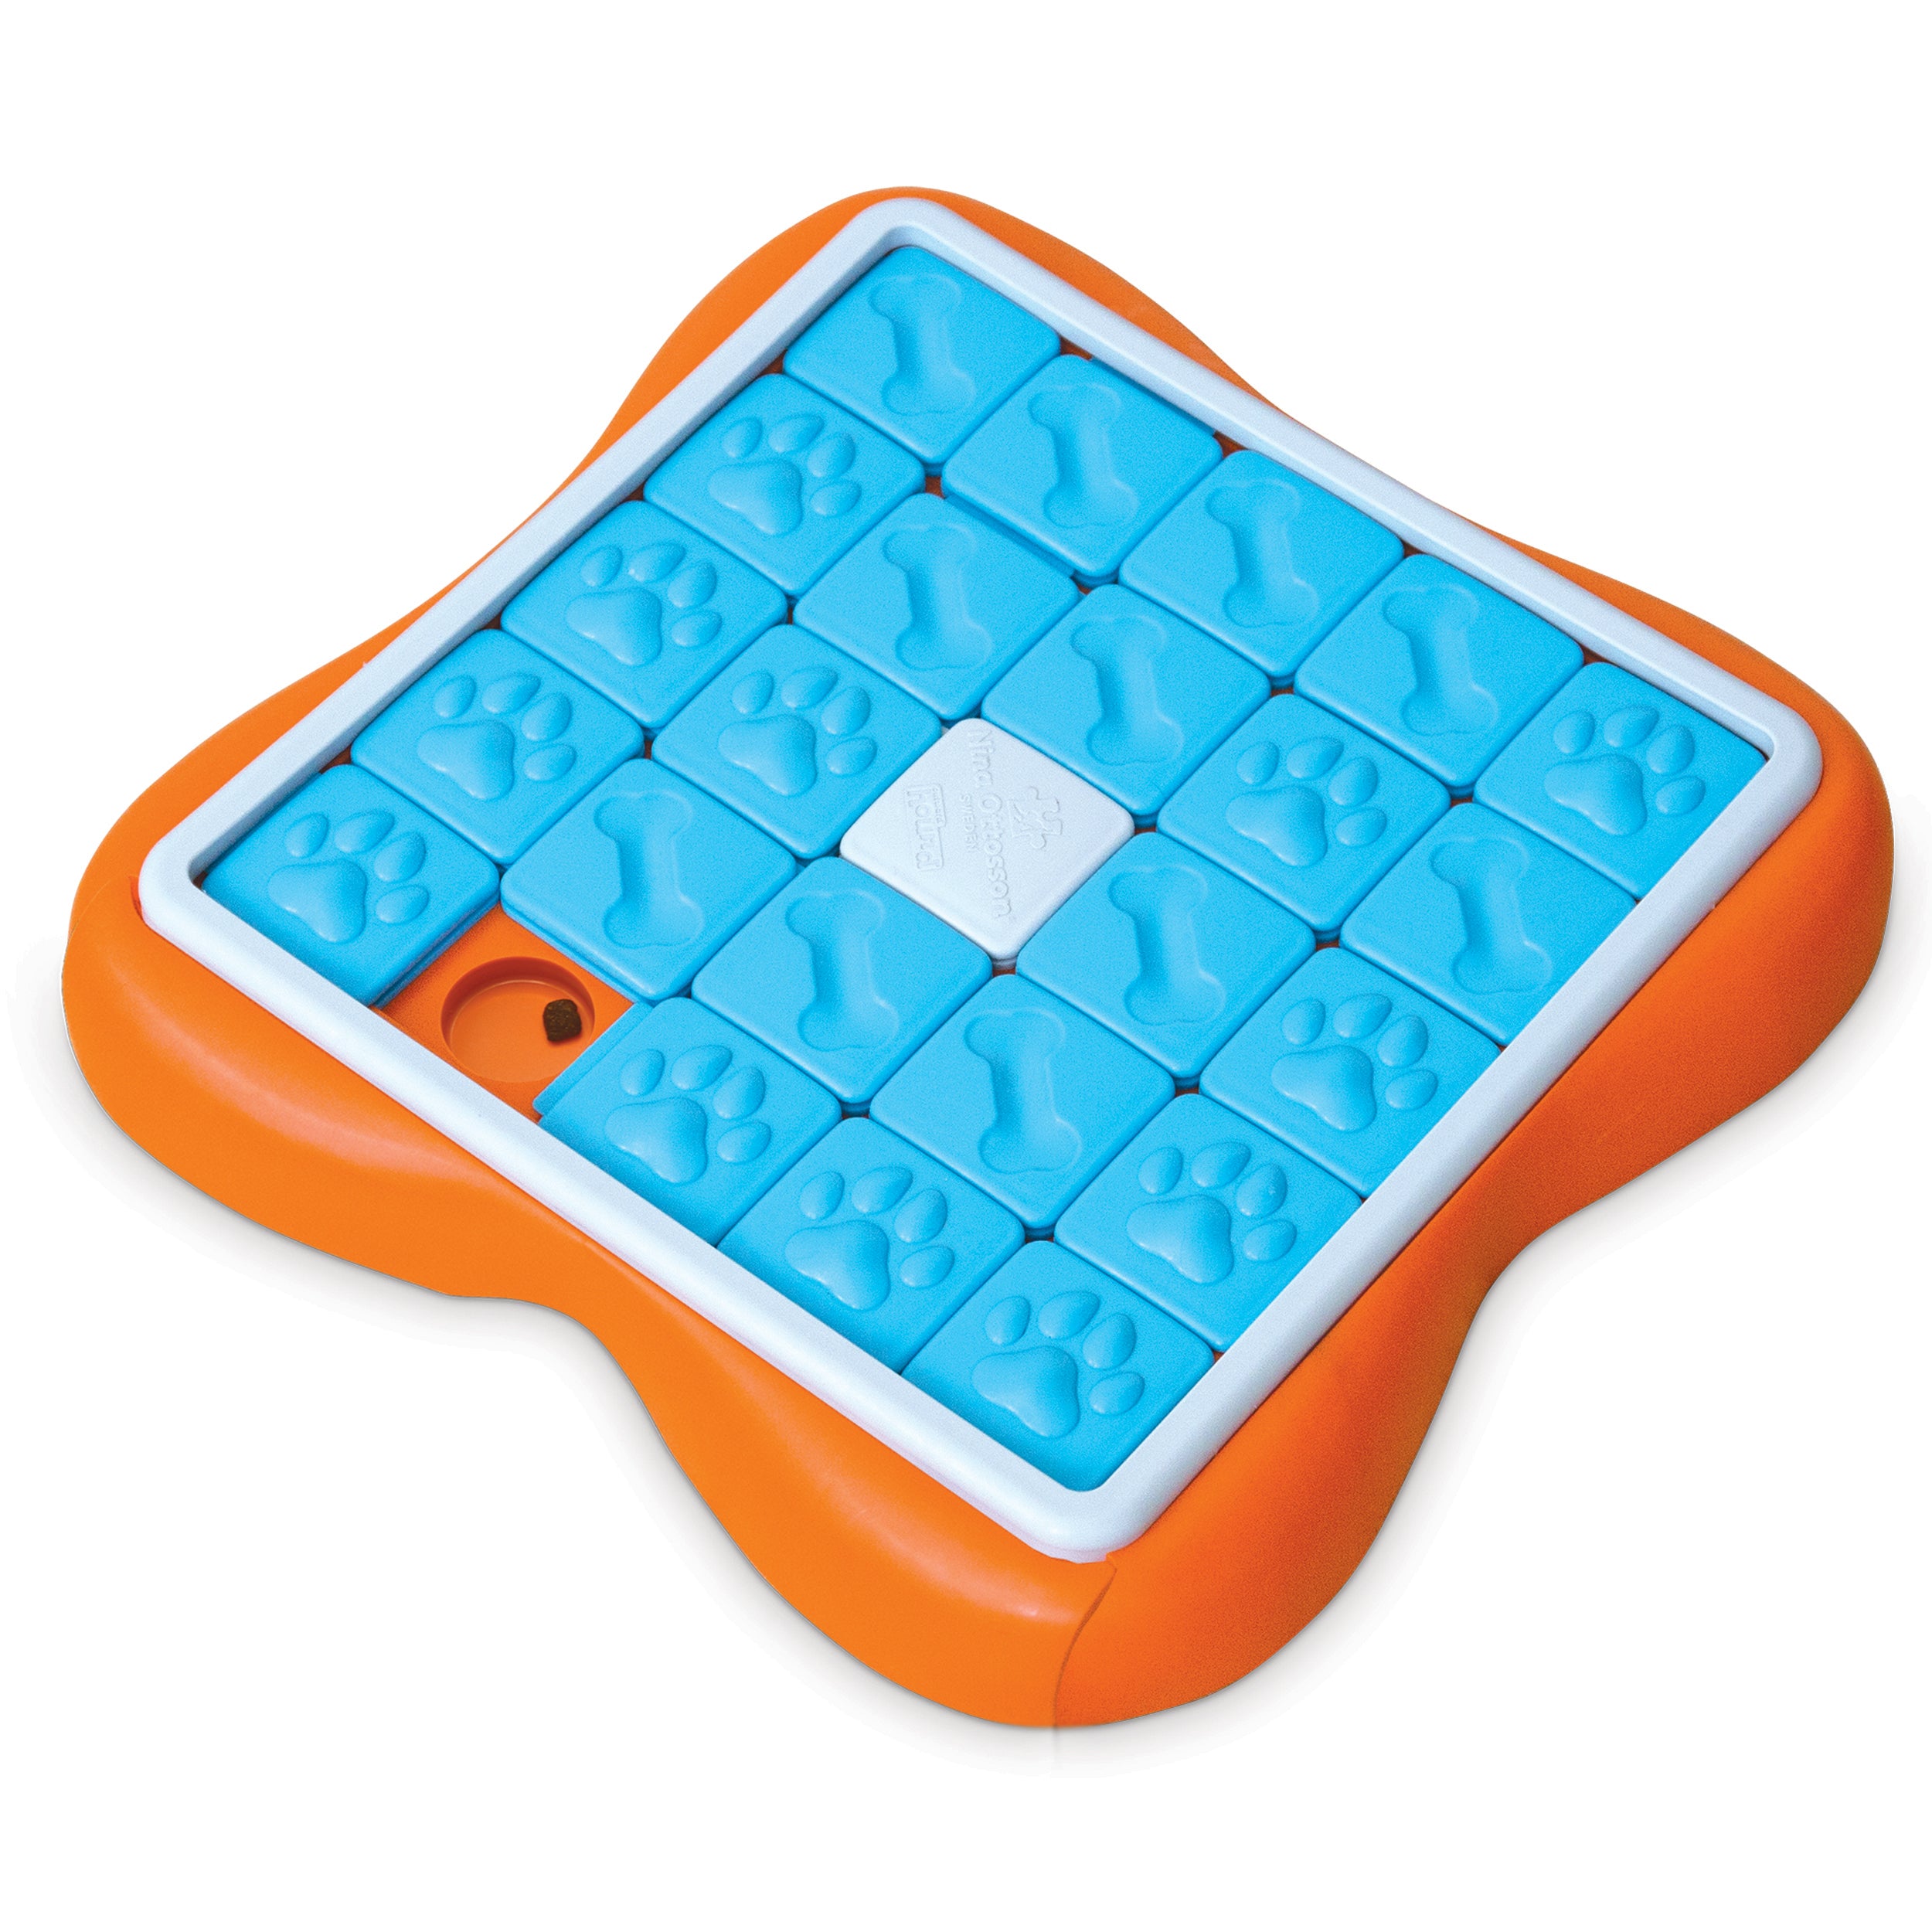 Challenge Your Dog's Mind With Interactive Treat Dispensing Puzzle